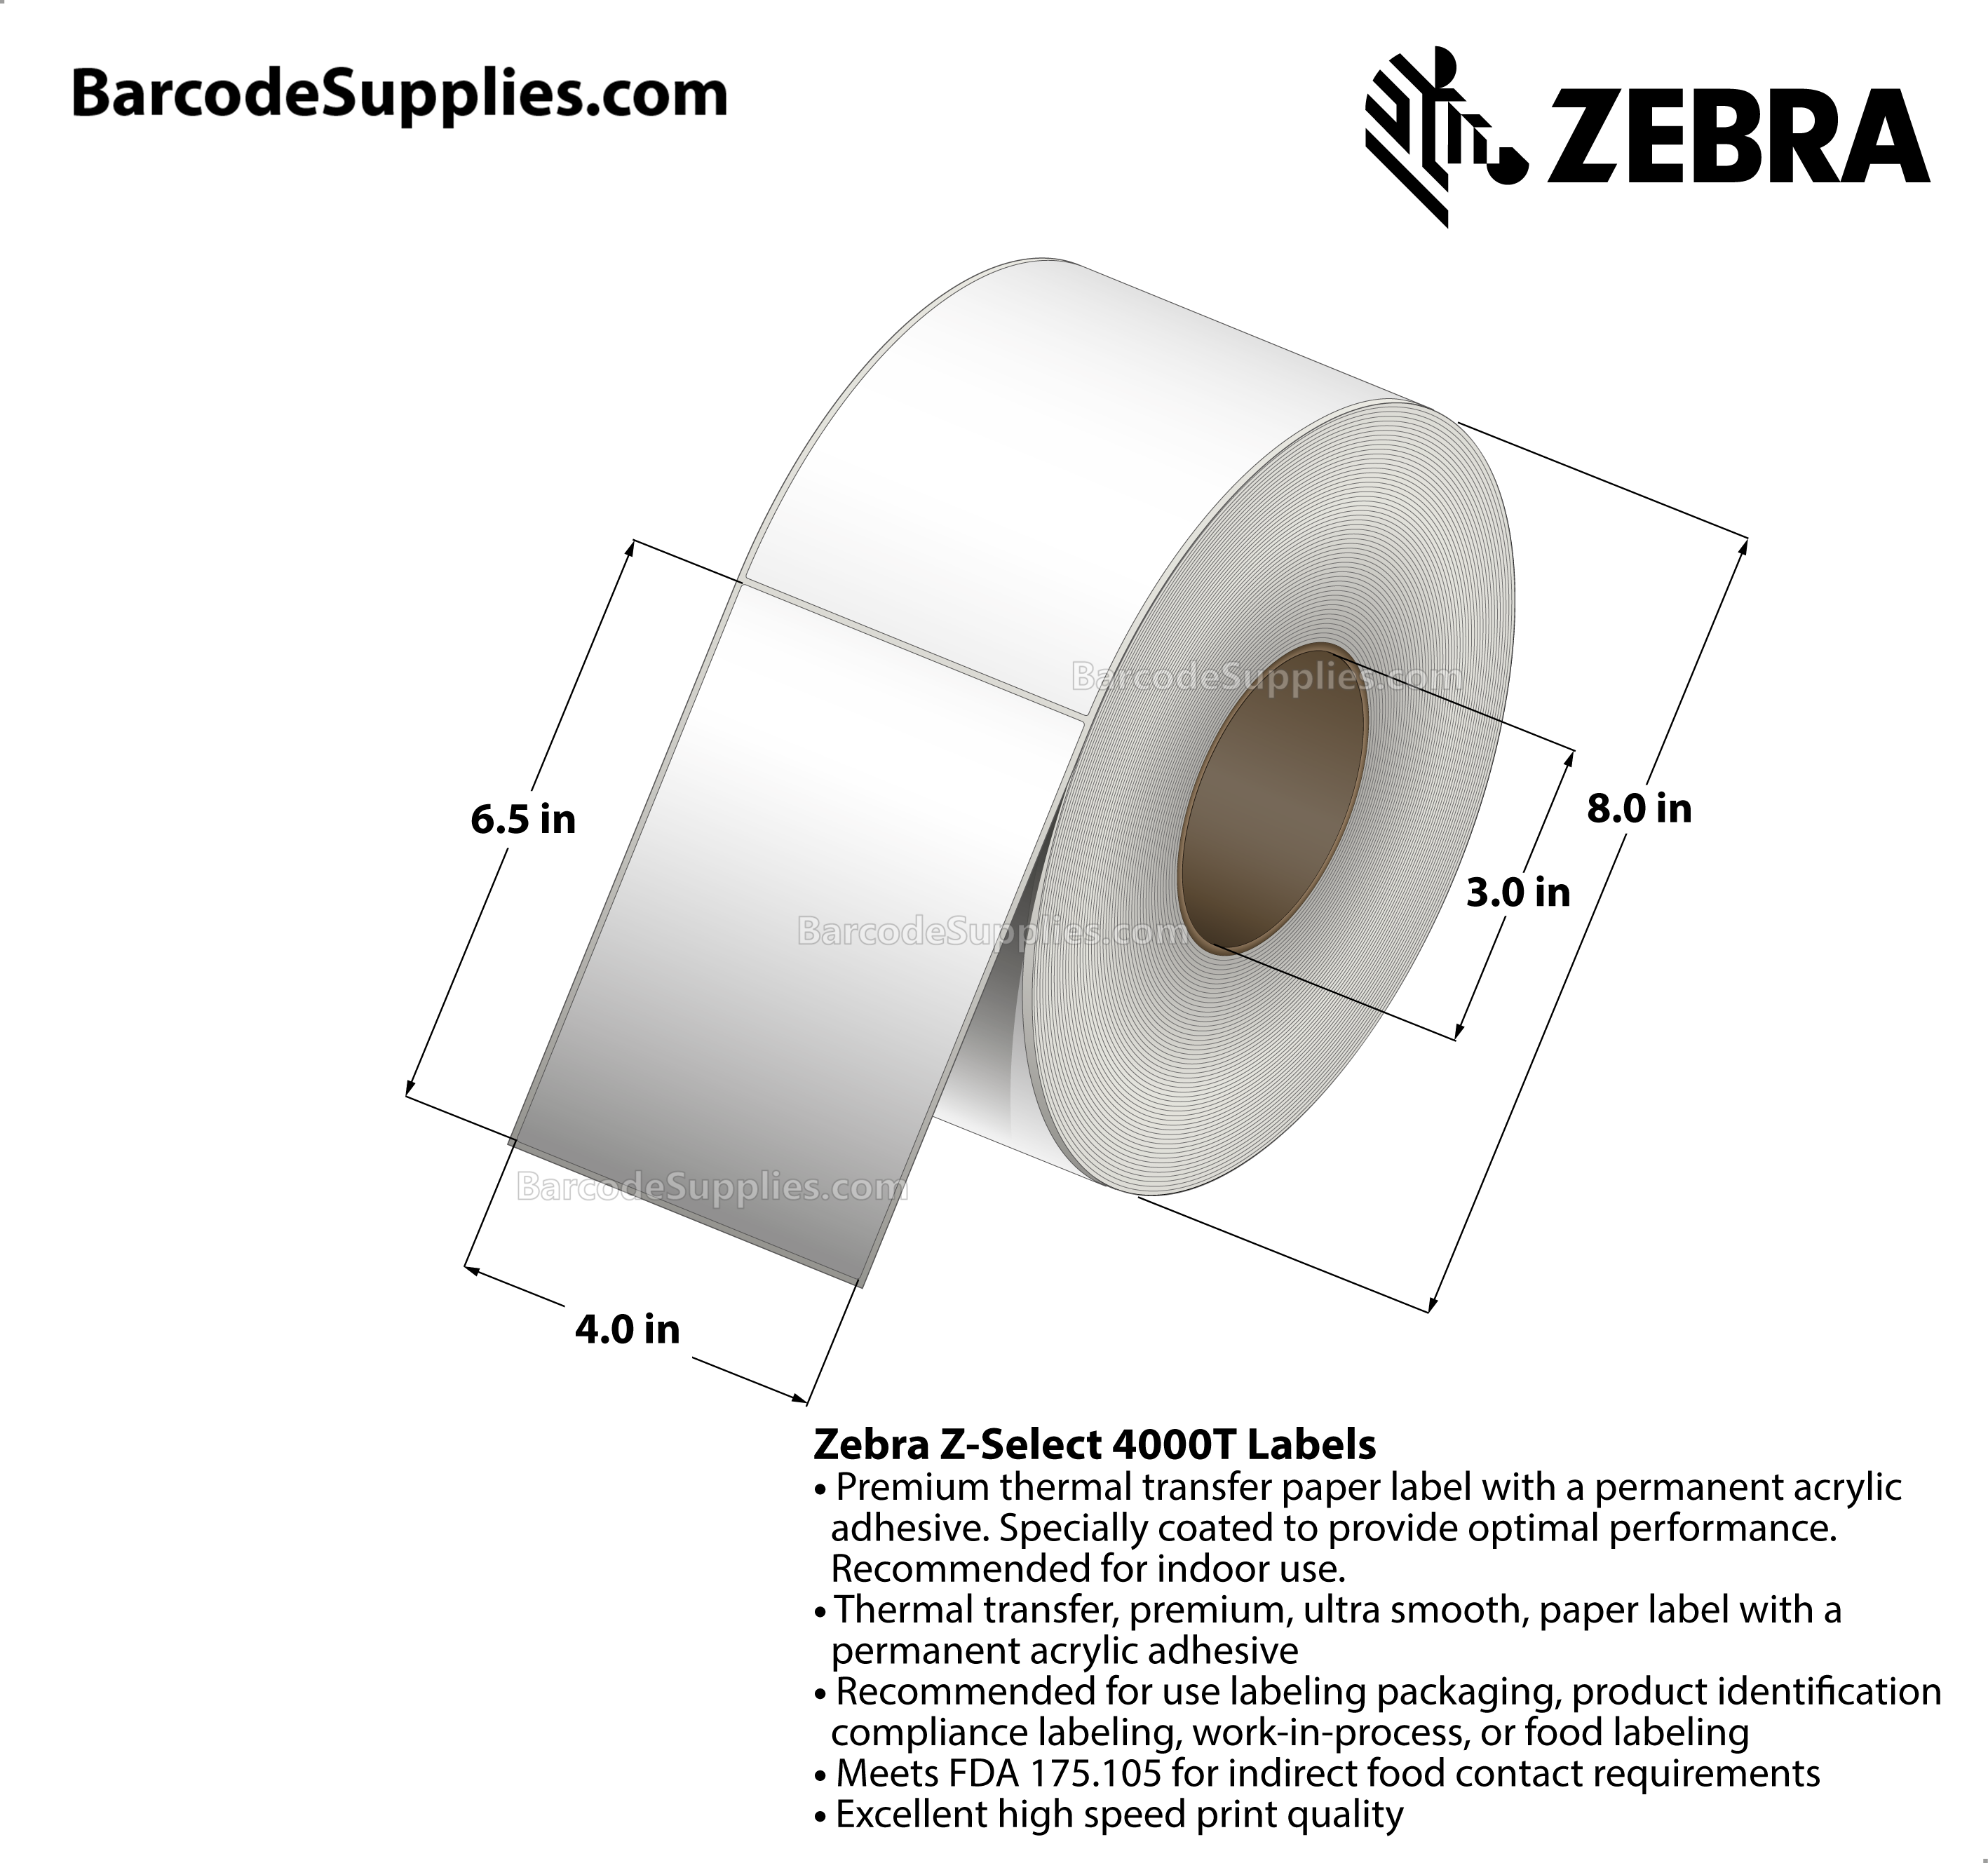 4 x 6.5 Thermal Transfer White Z-Select 4000T Labels With Permanent Adhesive - Not Perforated - 880 Labels Per Roll - Carton Of 4 Rolls - 3520 Labels Total - MPN: 72296